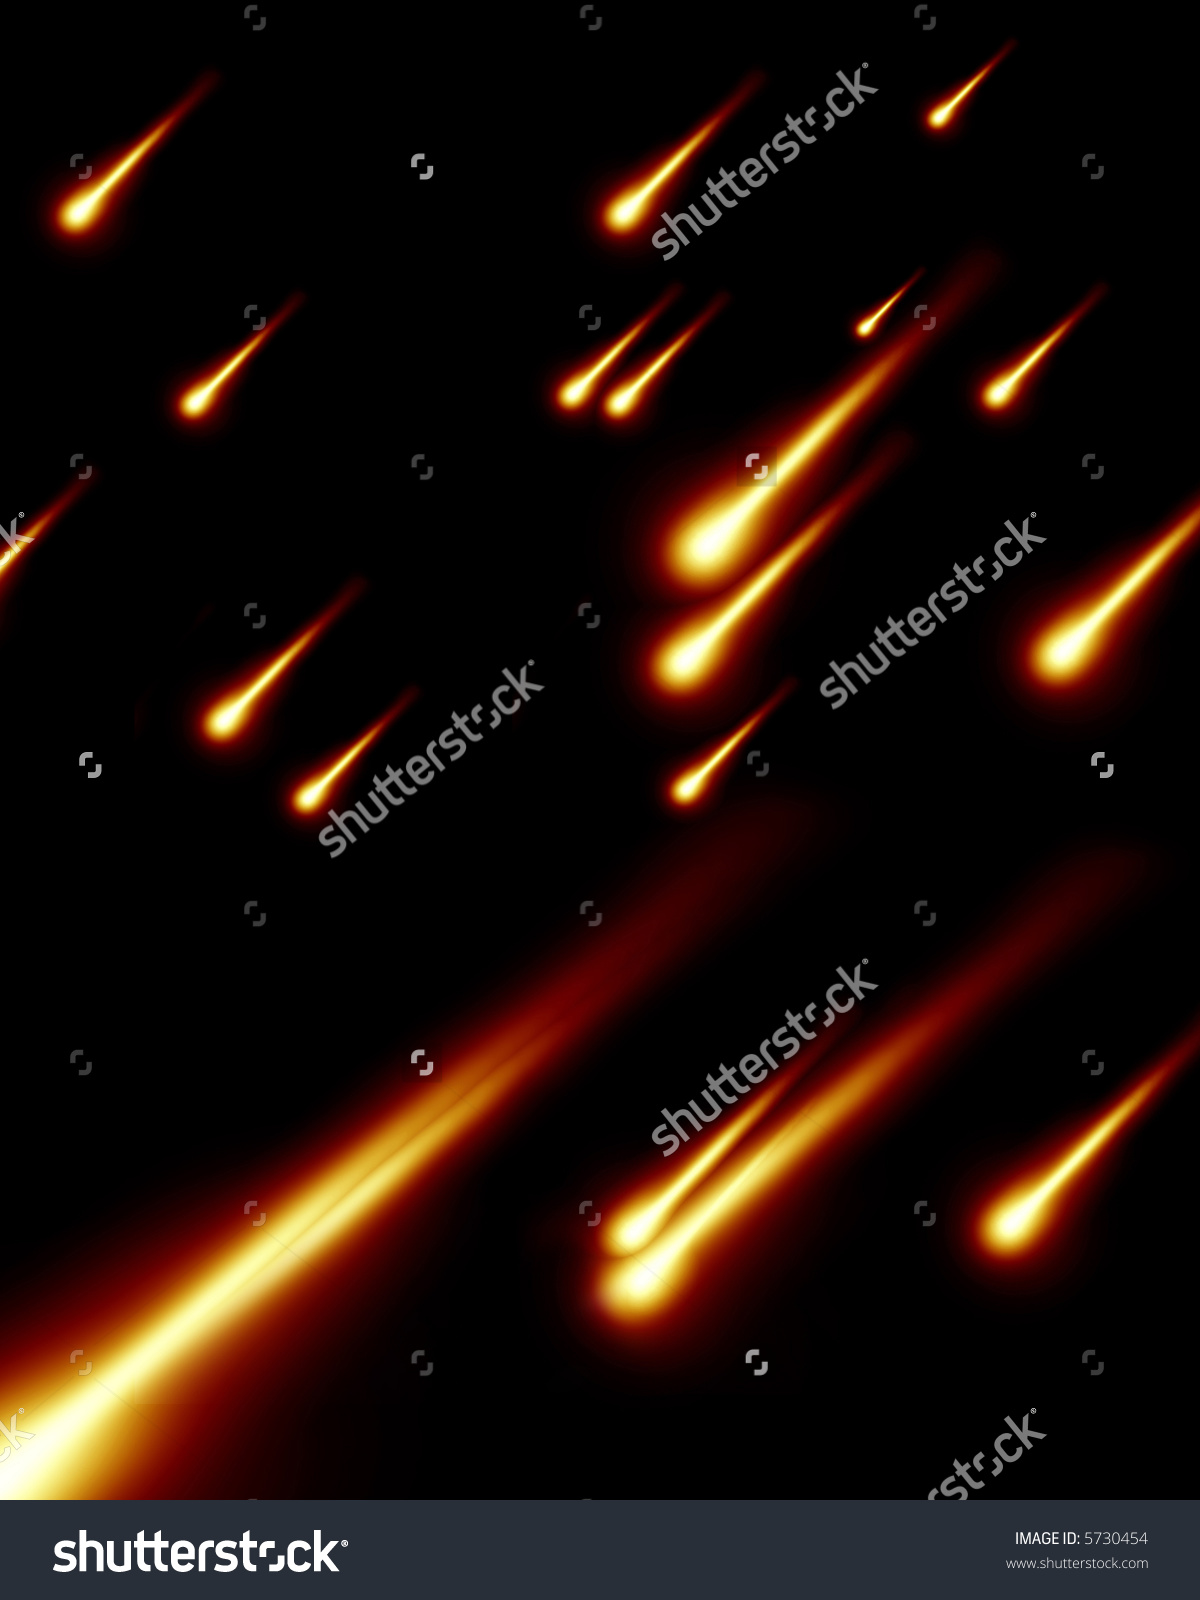 Meteor Shower clipart #2, Download drawings